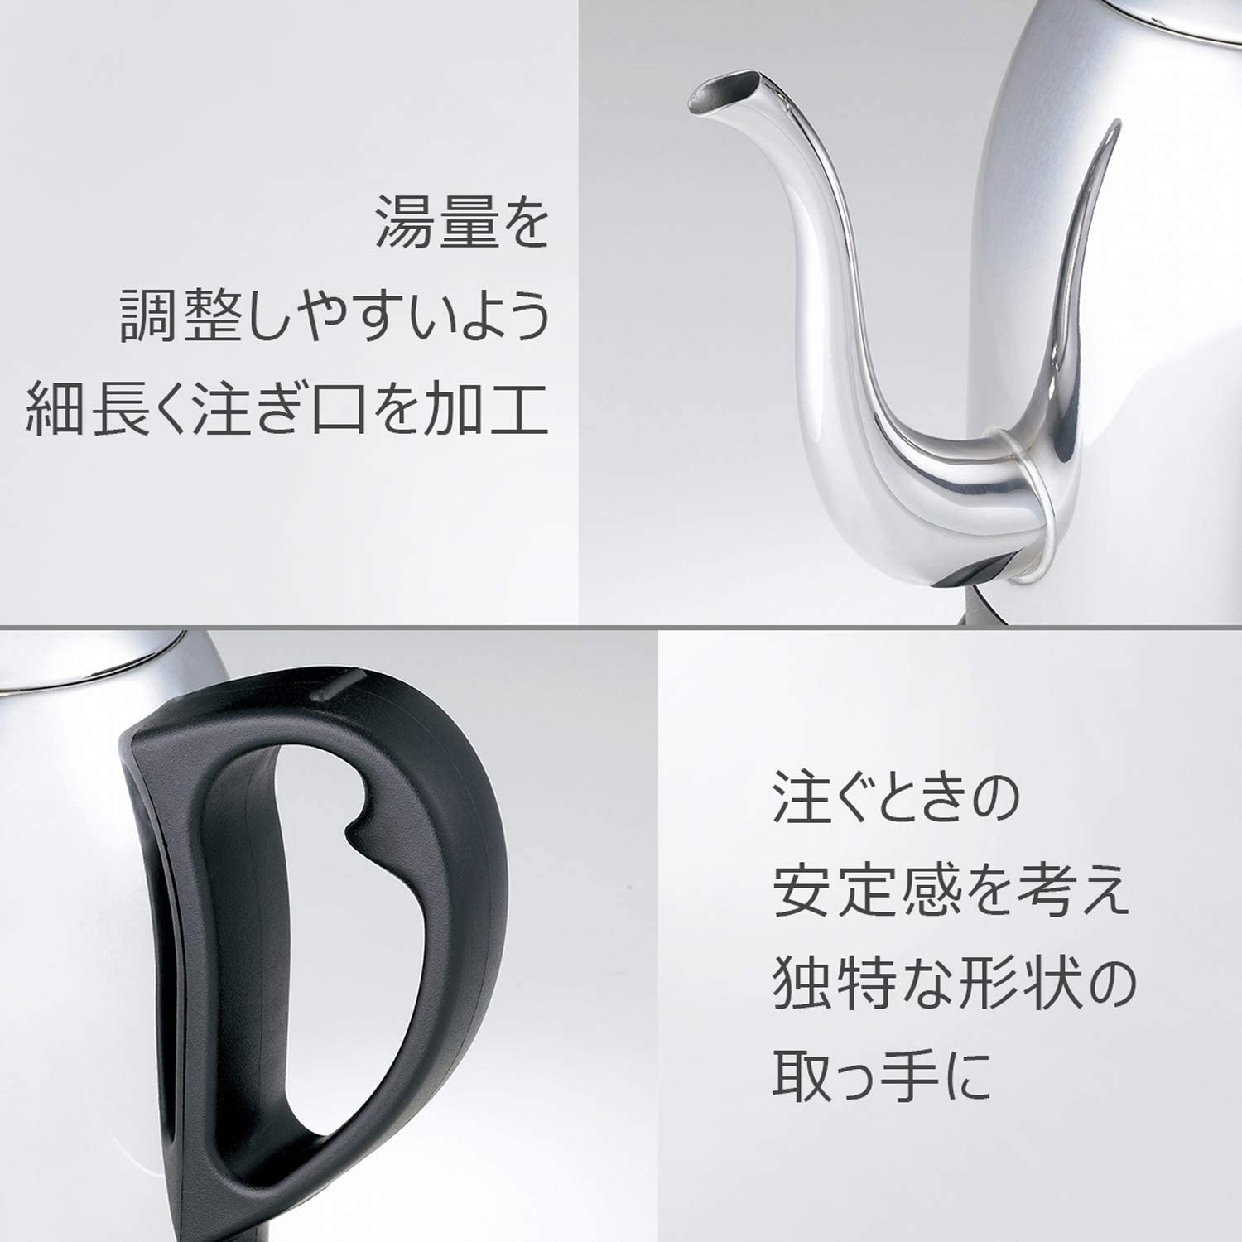 Russell Hobbs(ラッセルホブス) Cafe Kettle 7410JPの商品画像サムネ2 